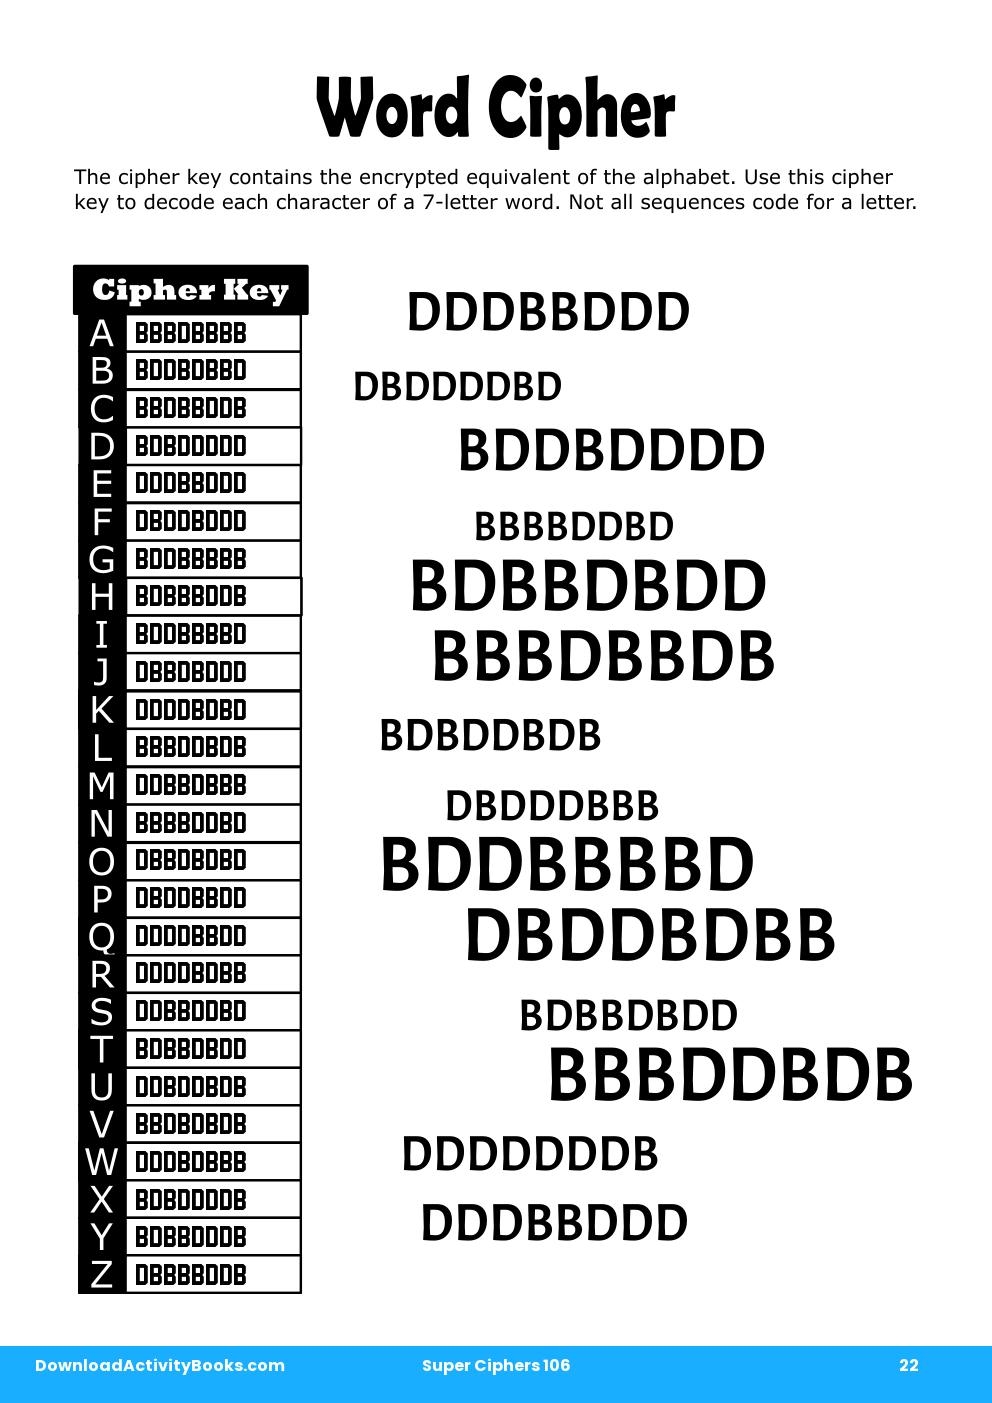 Word Cipher in Super Ciphers 106